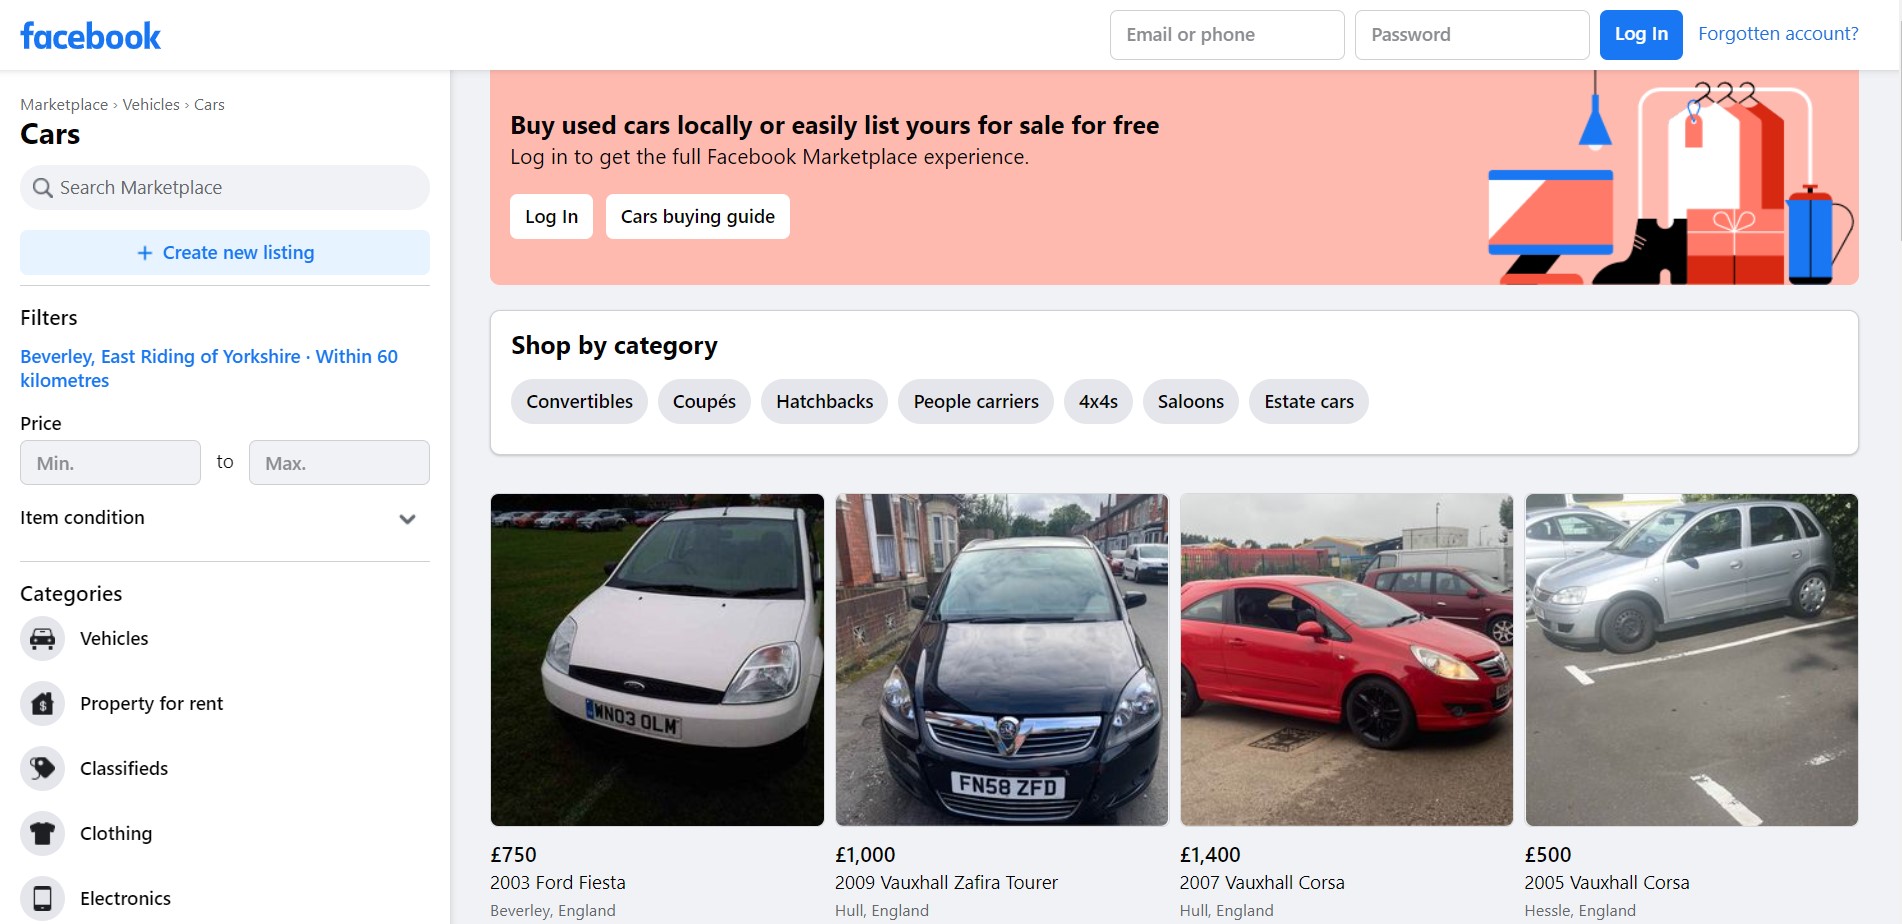 A Guide to Buying a Car on Facebook Marketplace